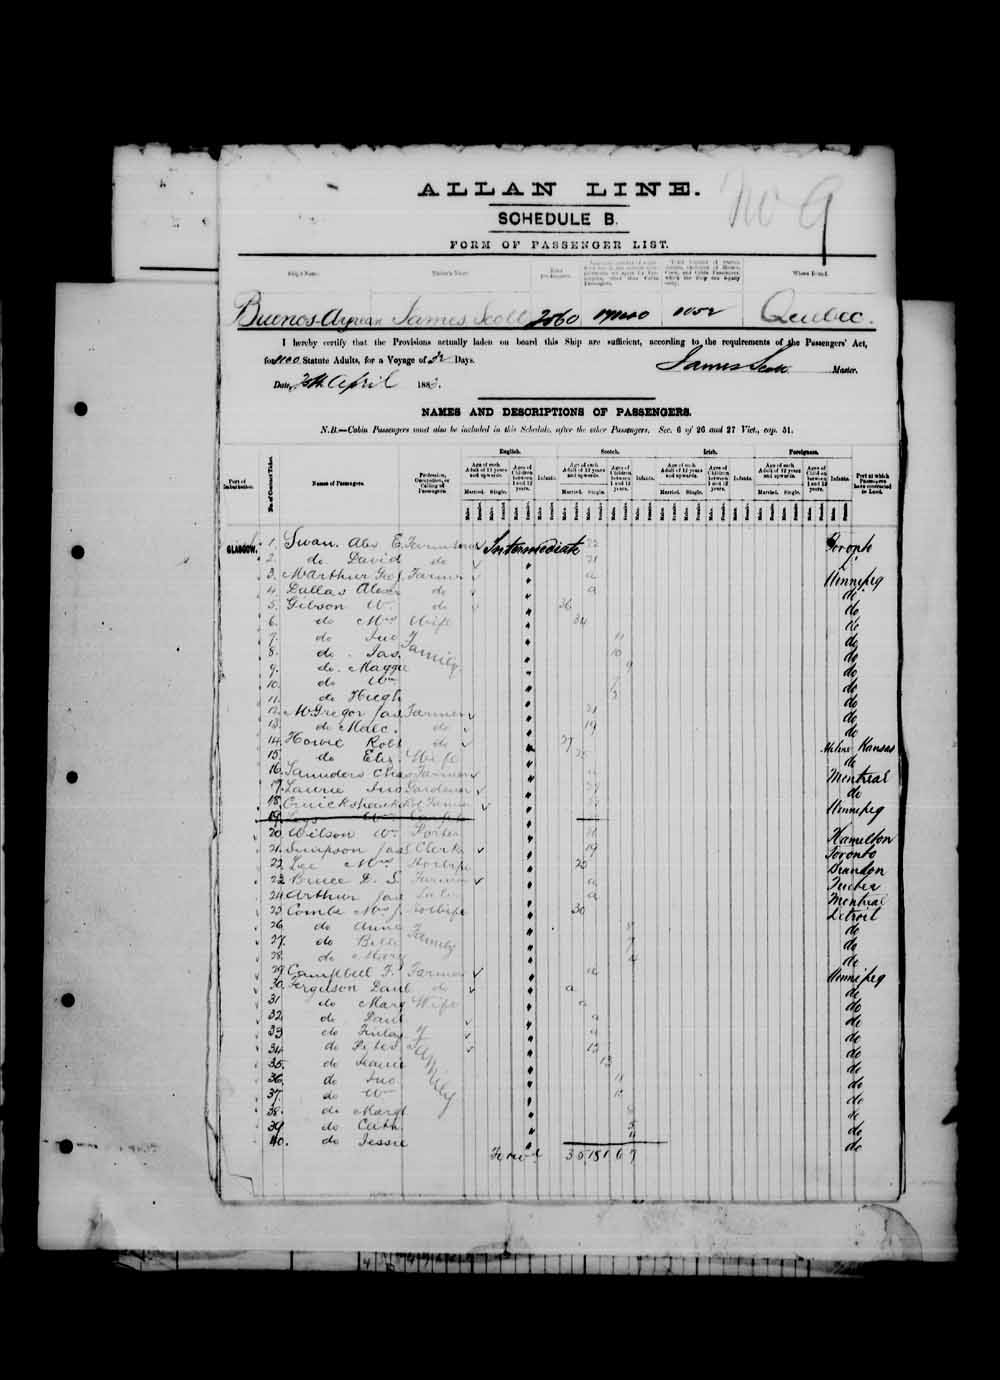 Digitized page of Passenger Lists for Image No.: e003542767